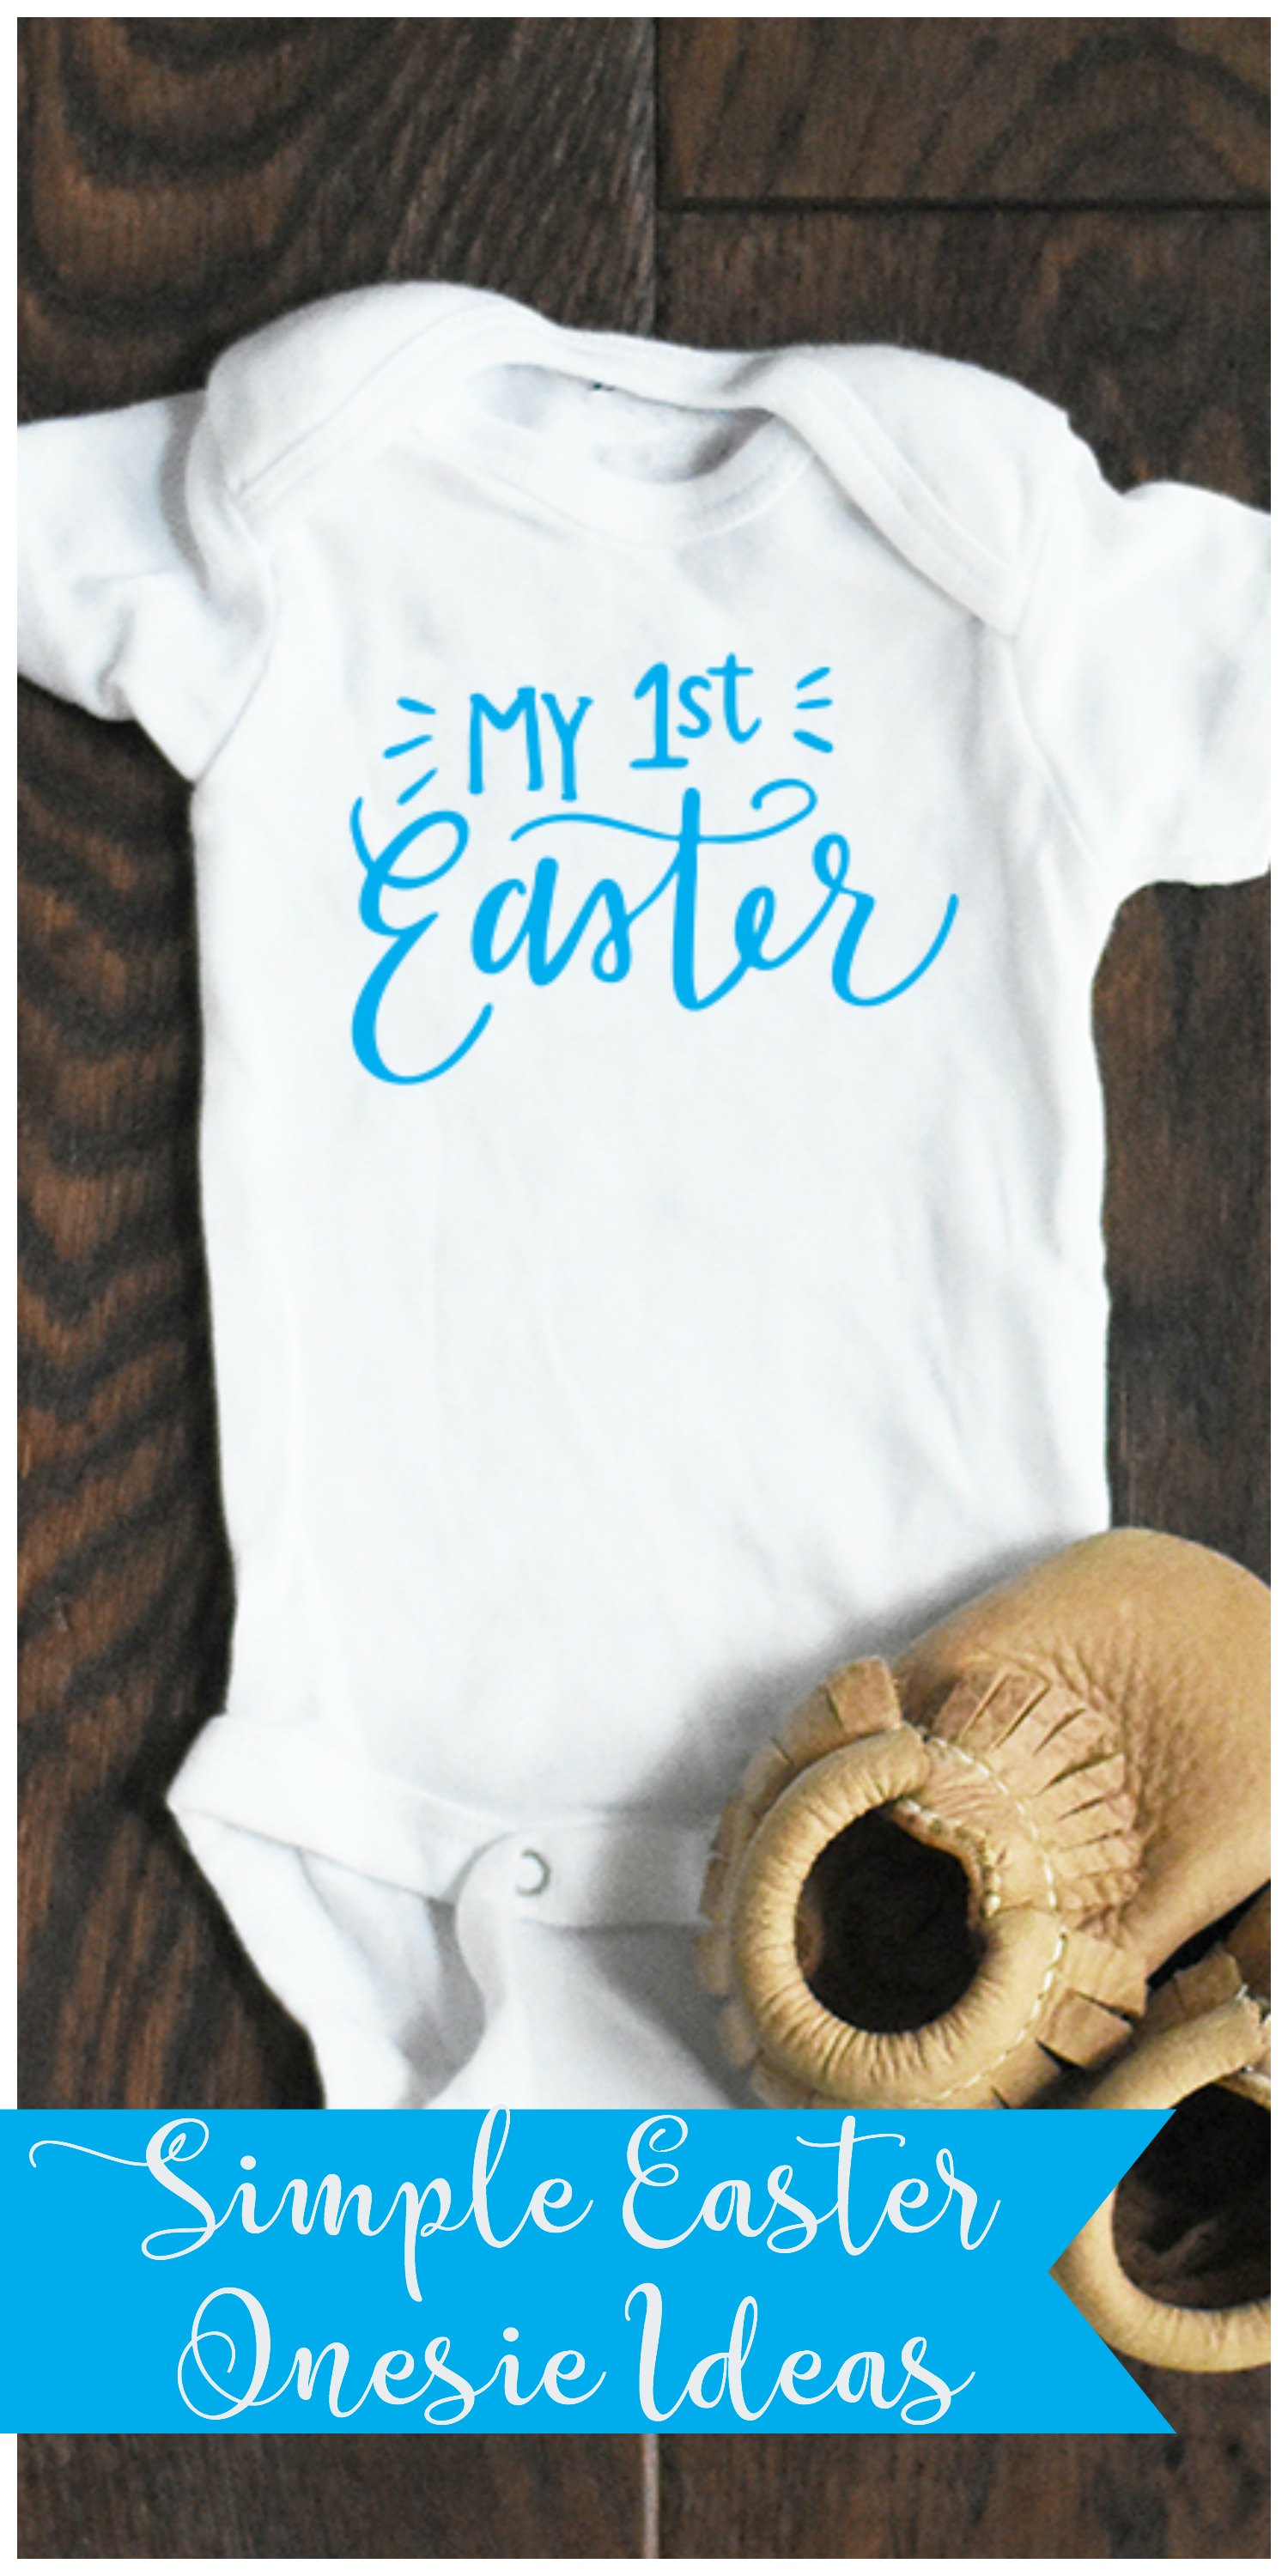 Simple Easter Shirts and Onesie Ideas - Everyday Party Magazine